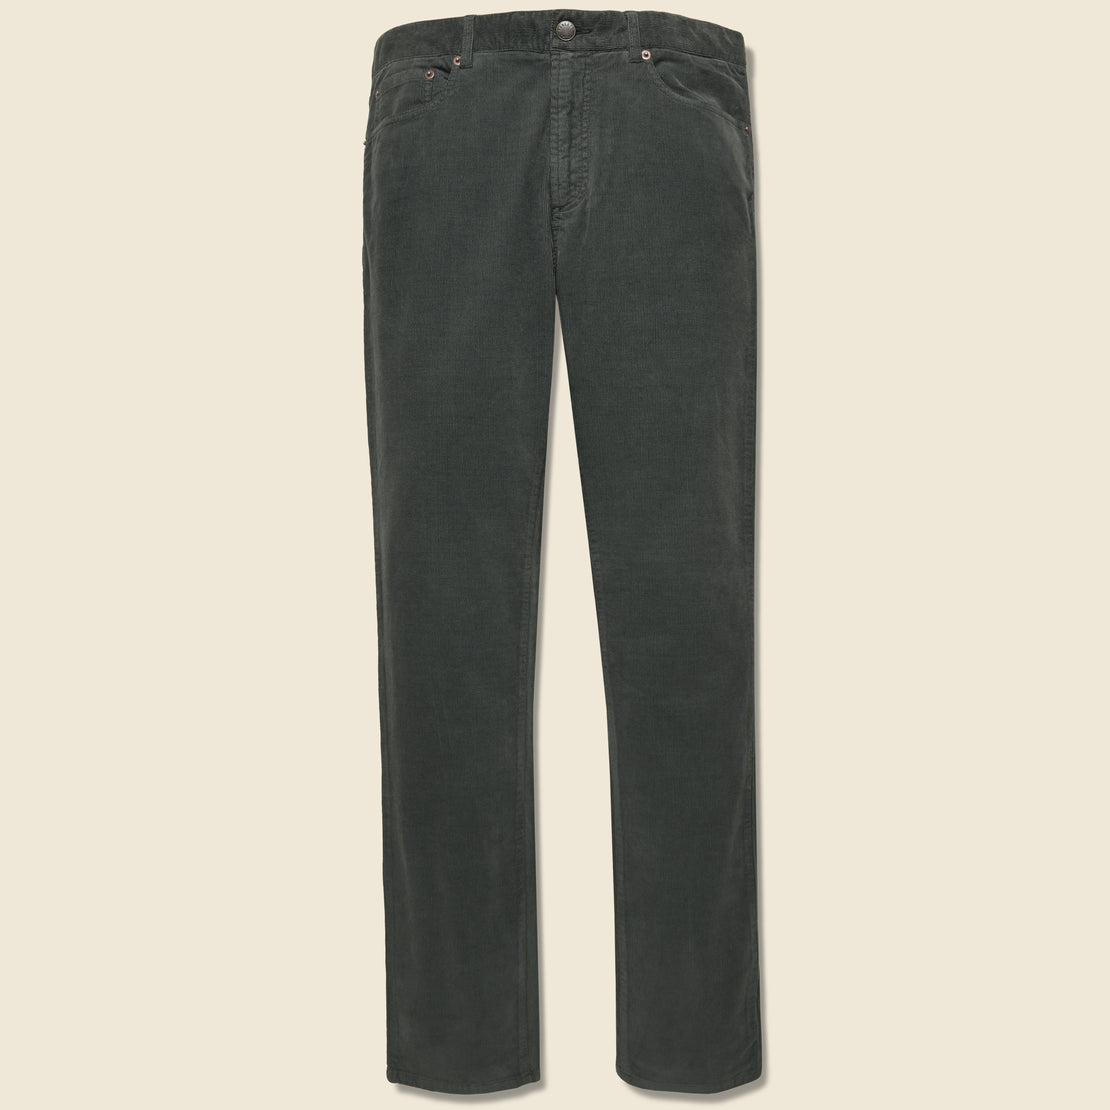 Faherty Stretch Corduroy Pant - Washed Black